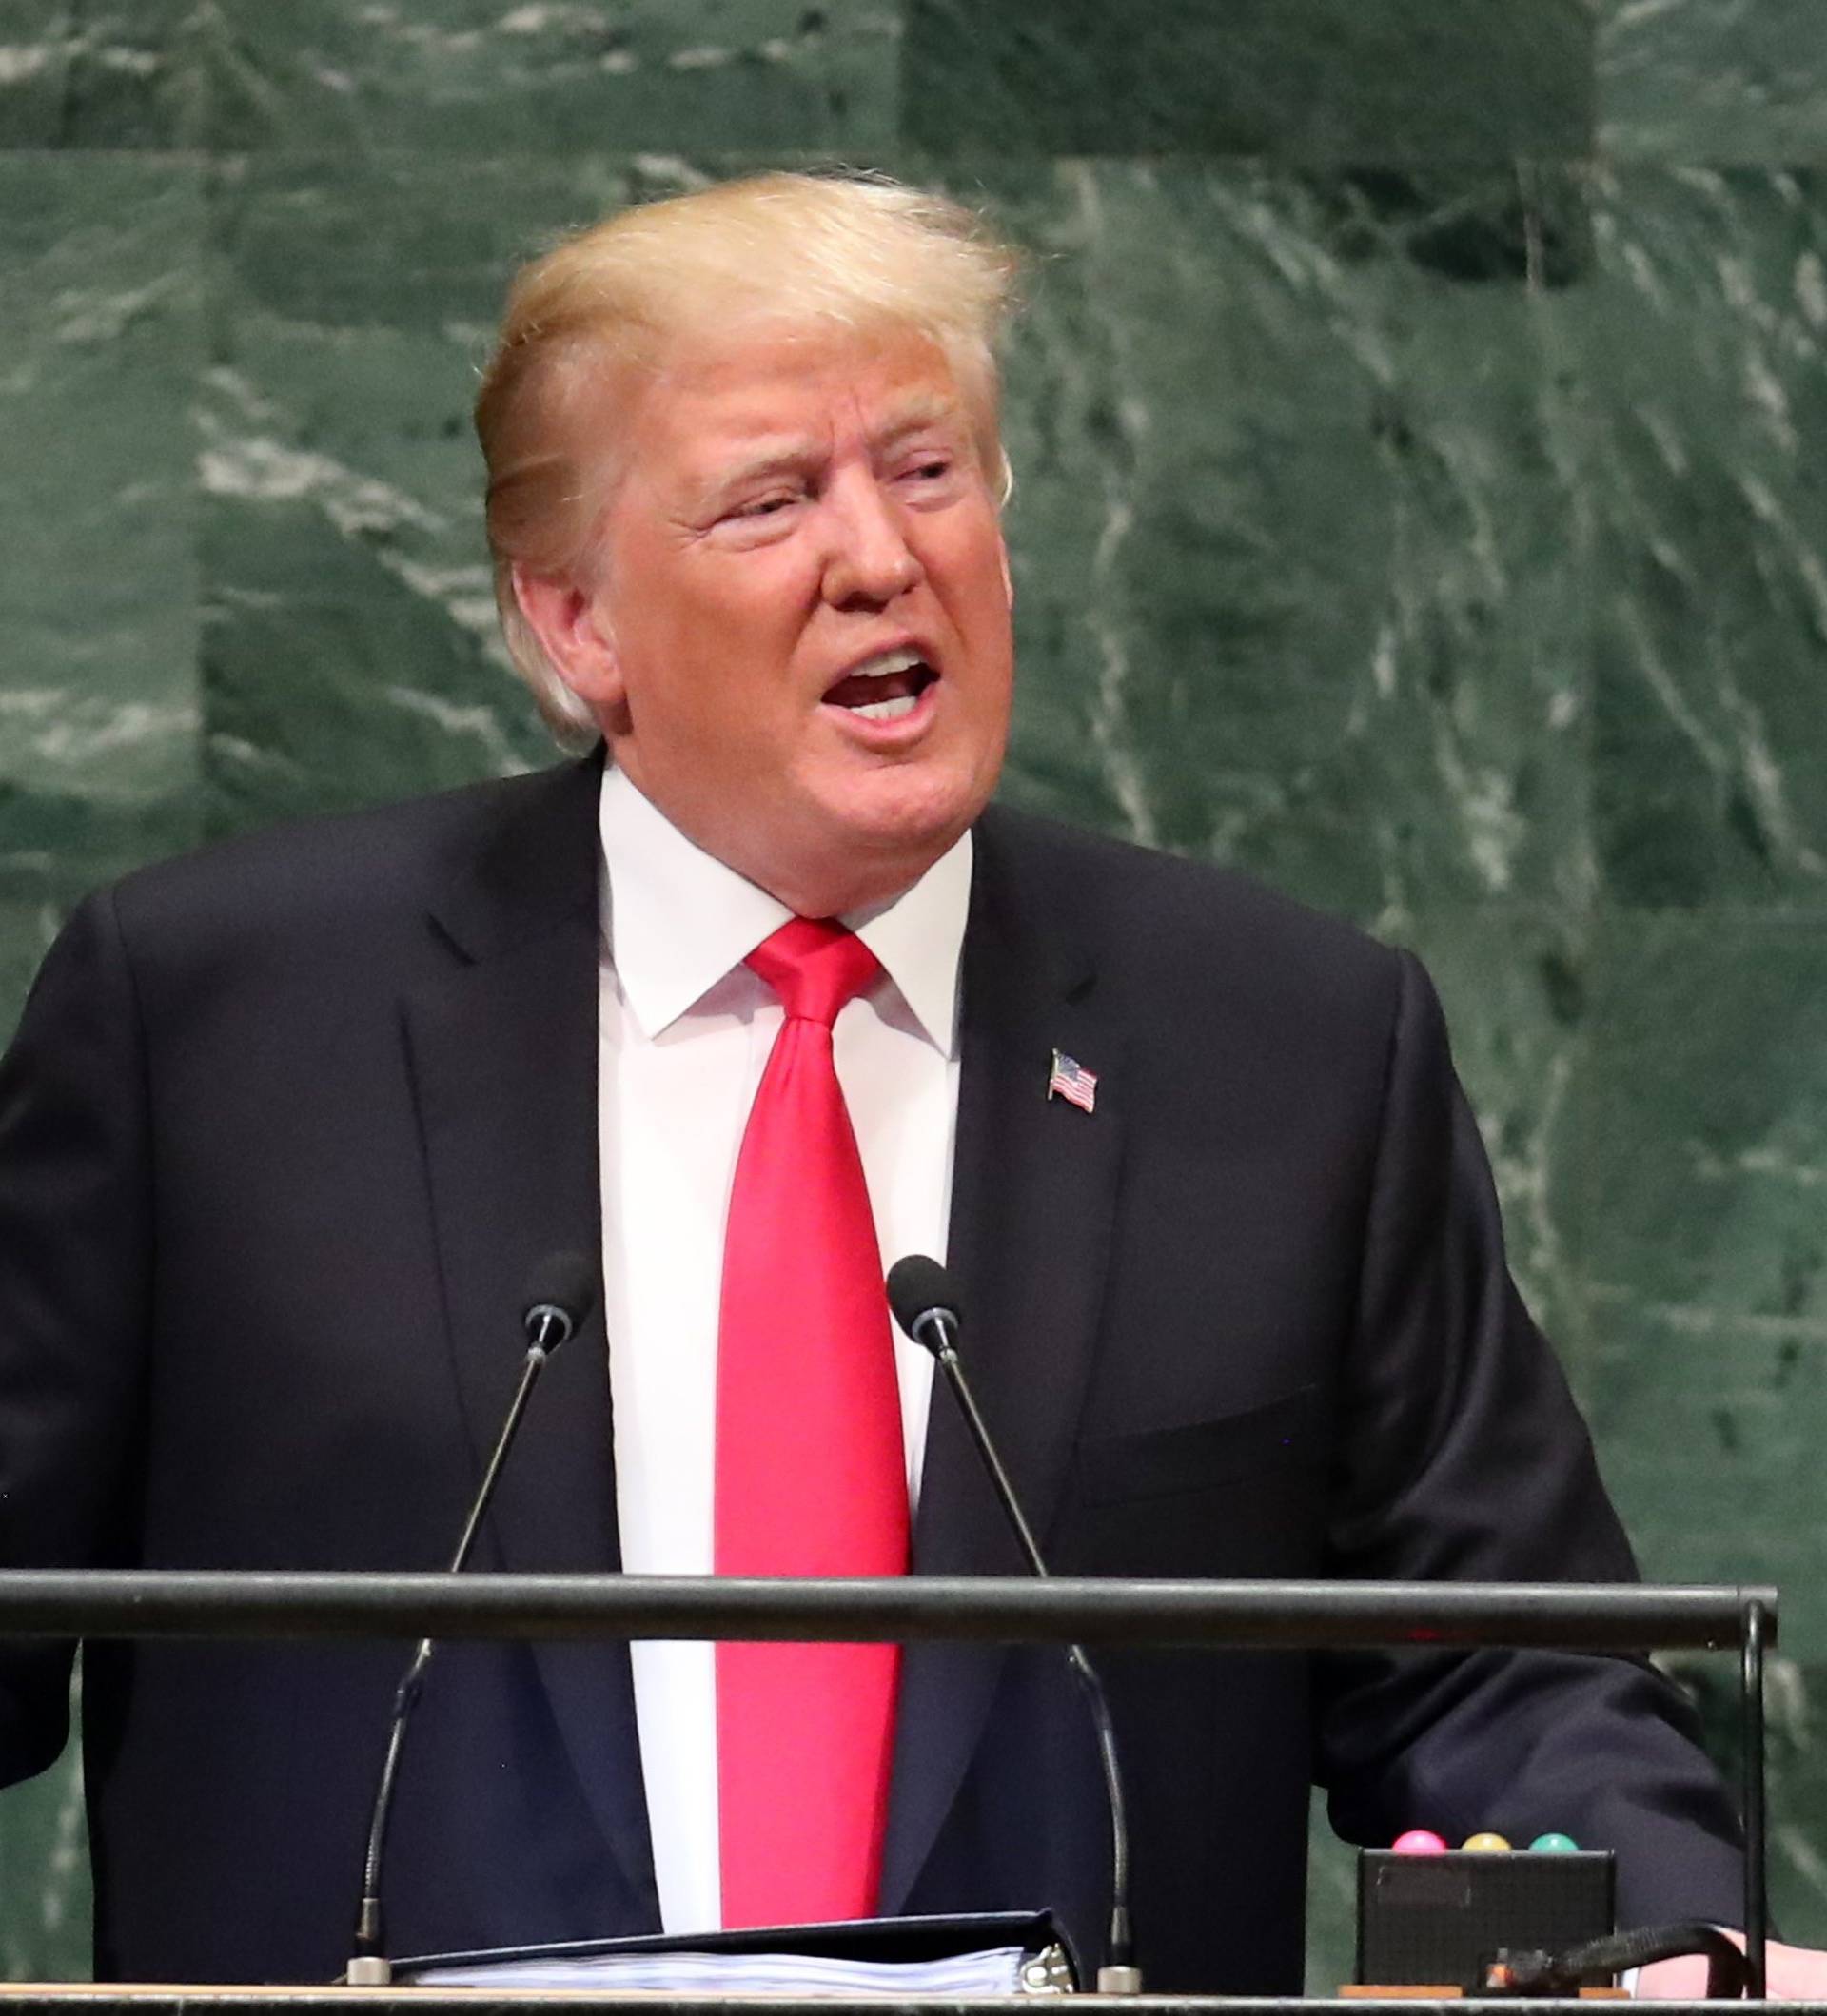 U.S. President Trump addresses the United Nations General Assembly in New York